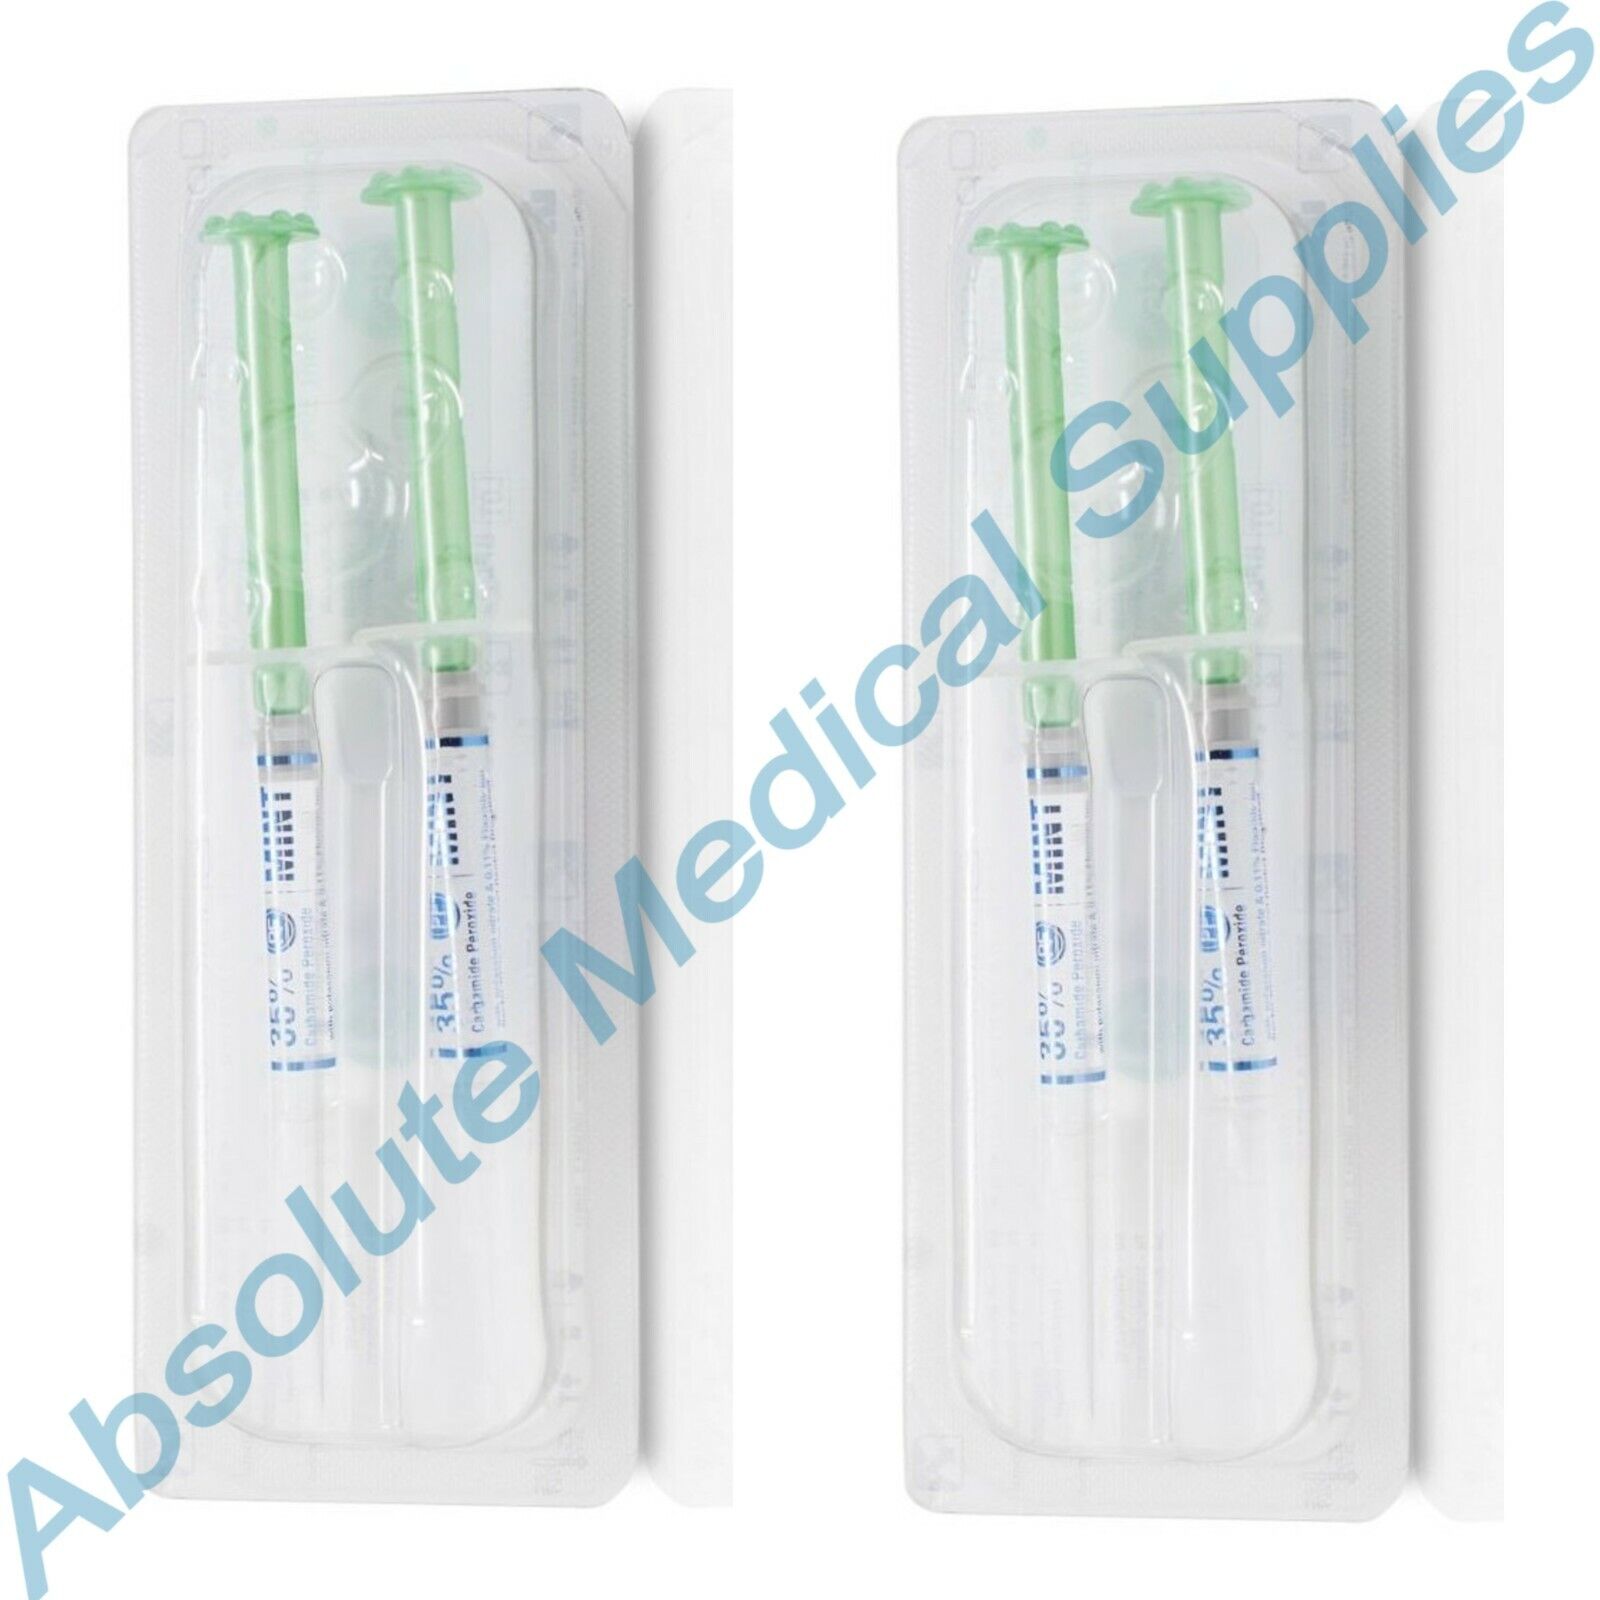 *2-Pack* Ultradent Opalescence PF 35% Tooth Whitening Refills Mint Flavor 5403 Opalescence 5403-U